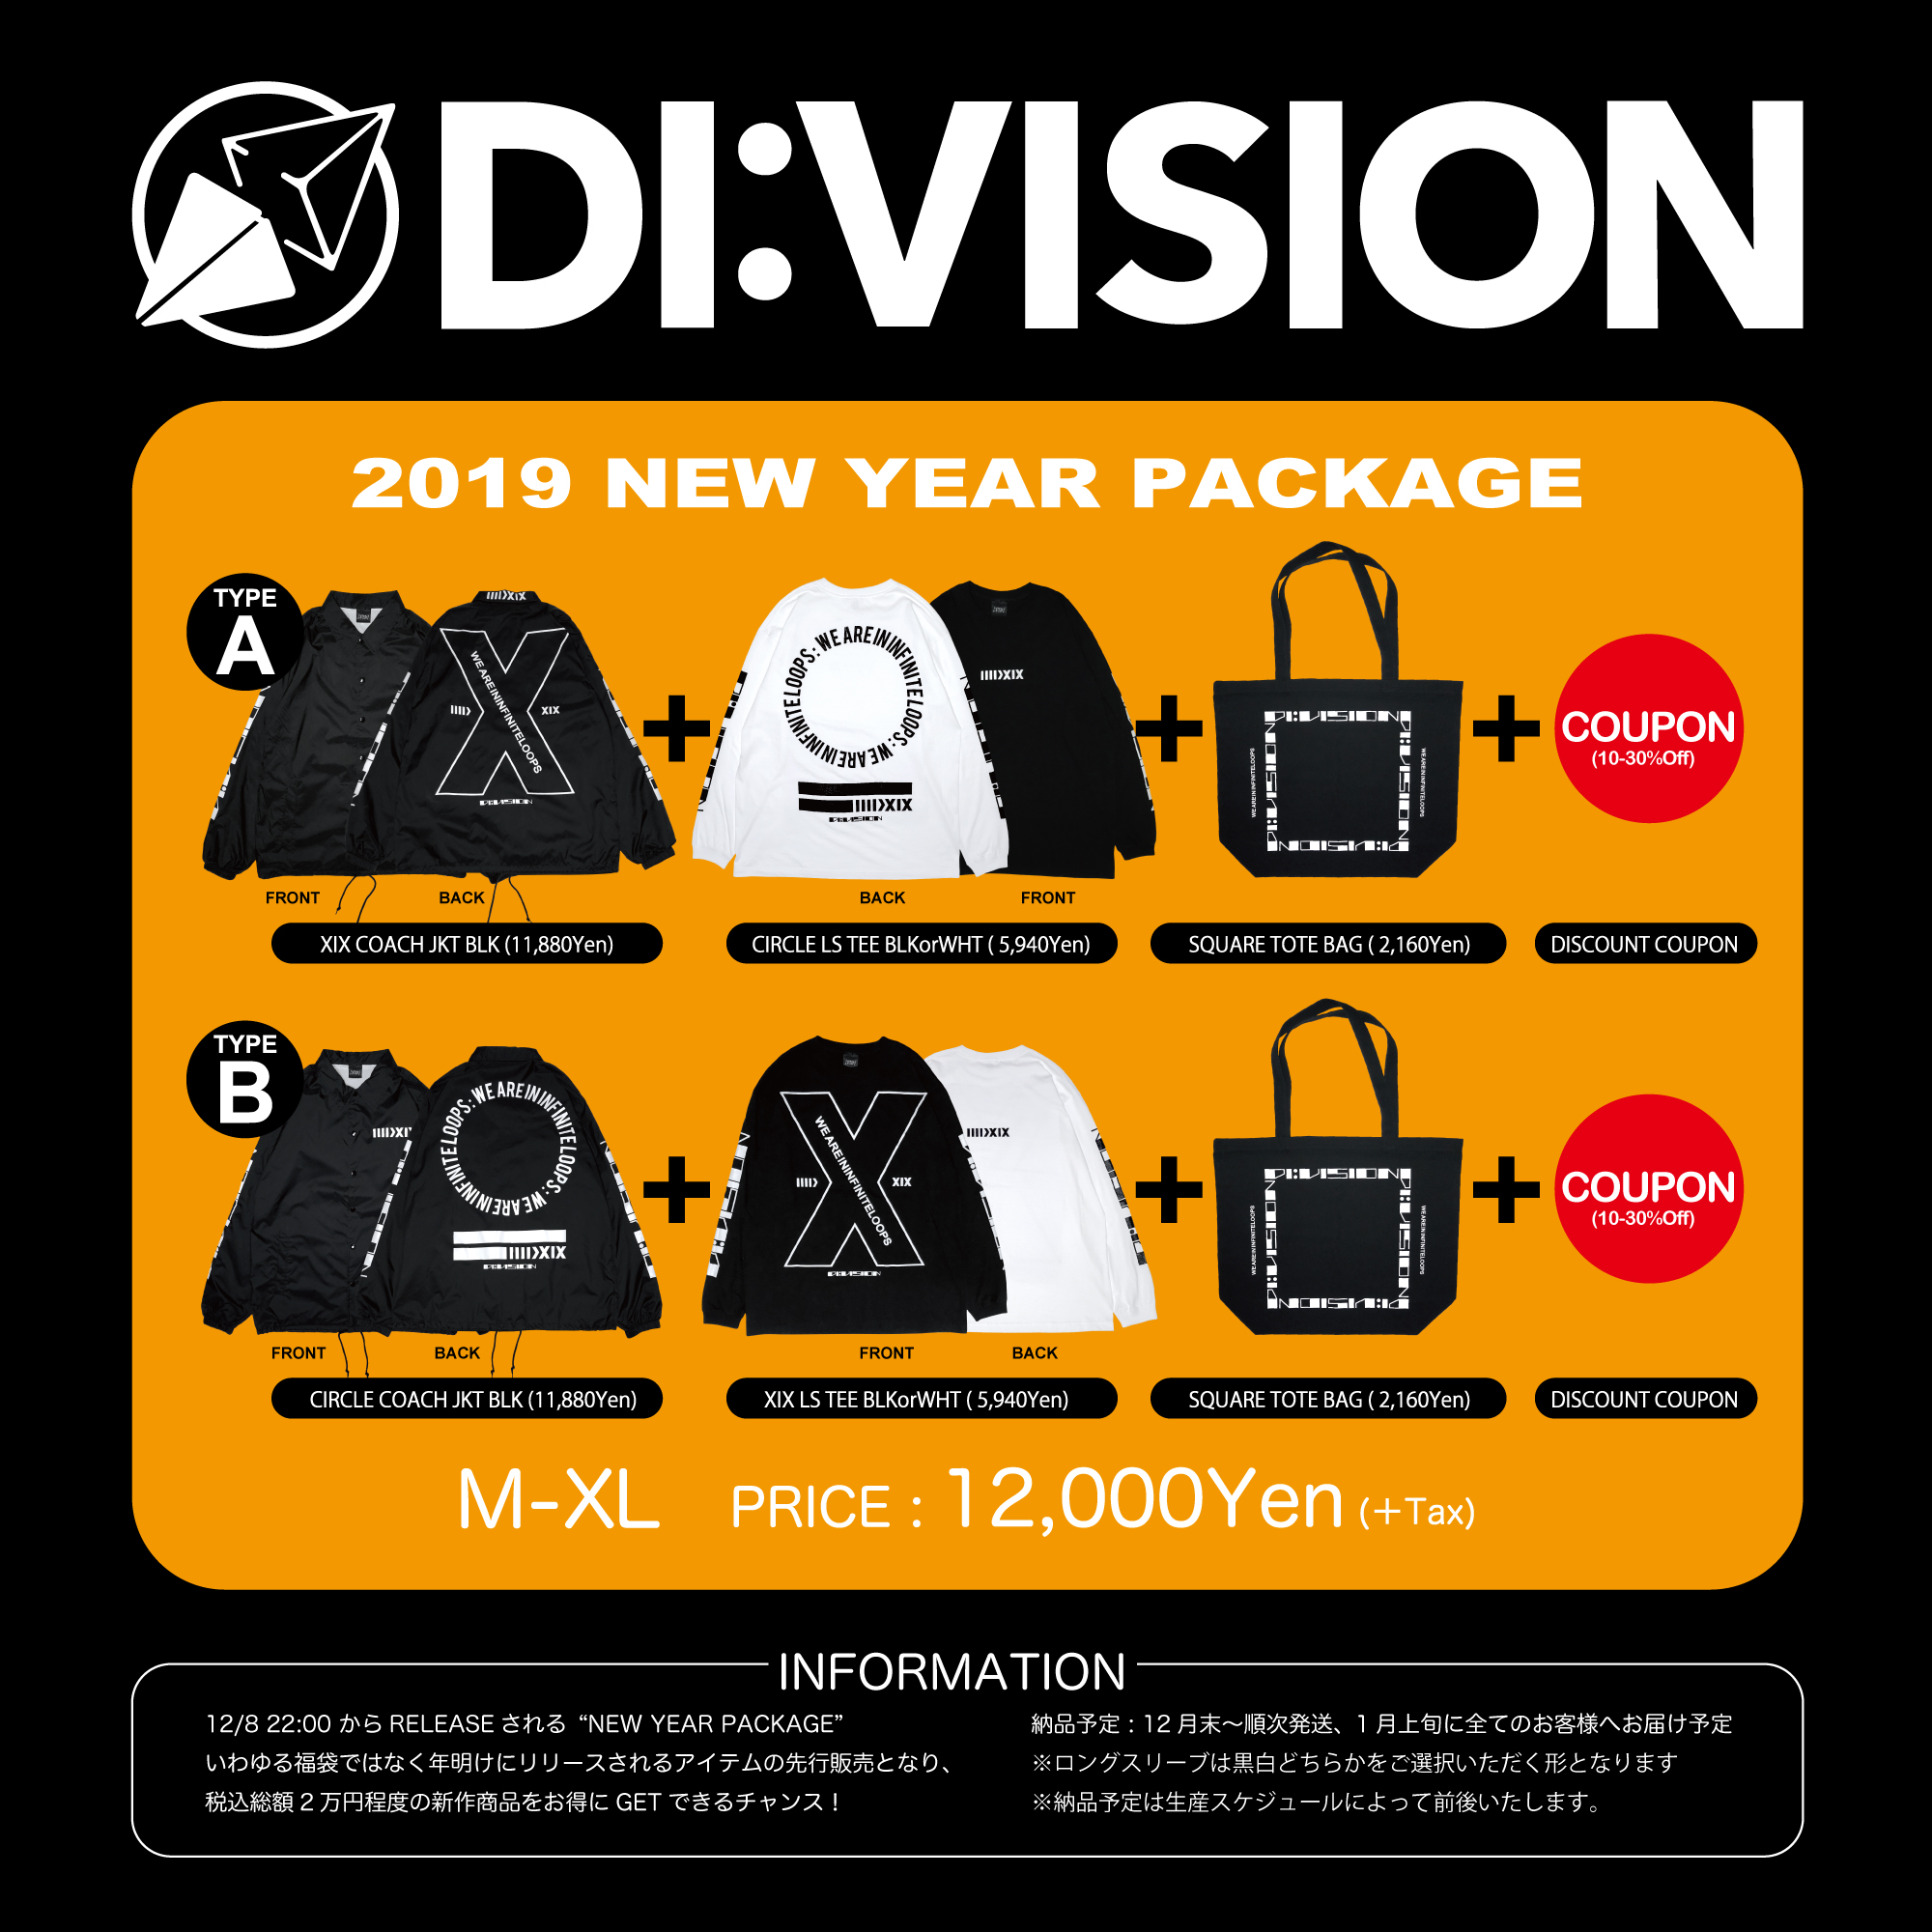 ◀︎NEW YEAR PACKAGE▶︎